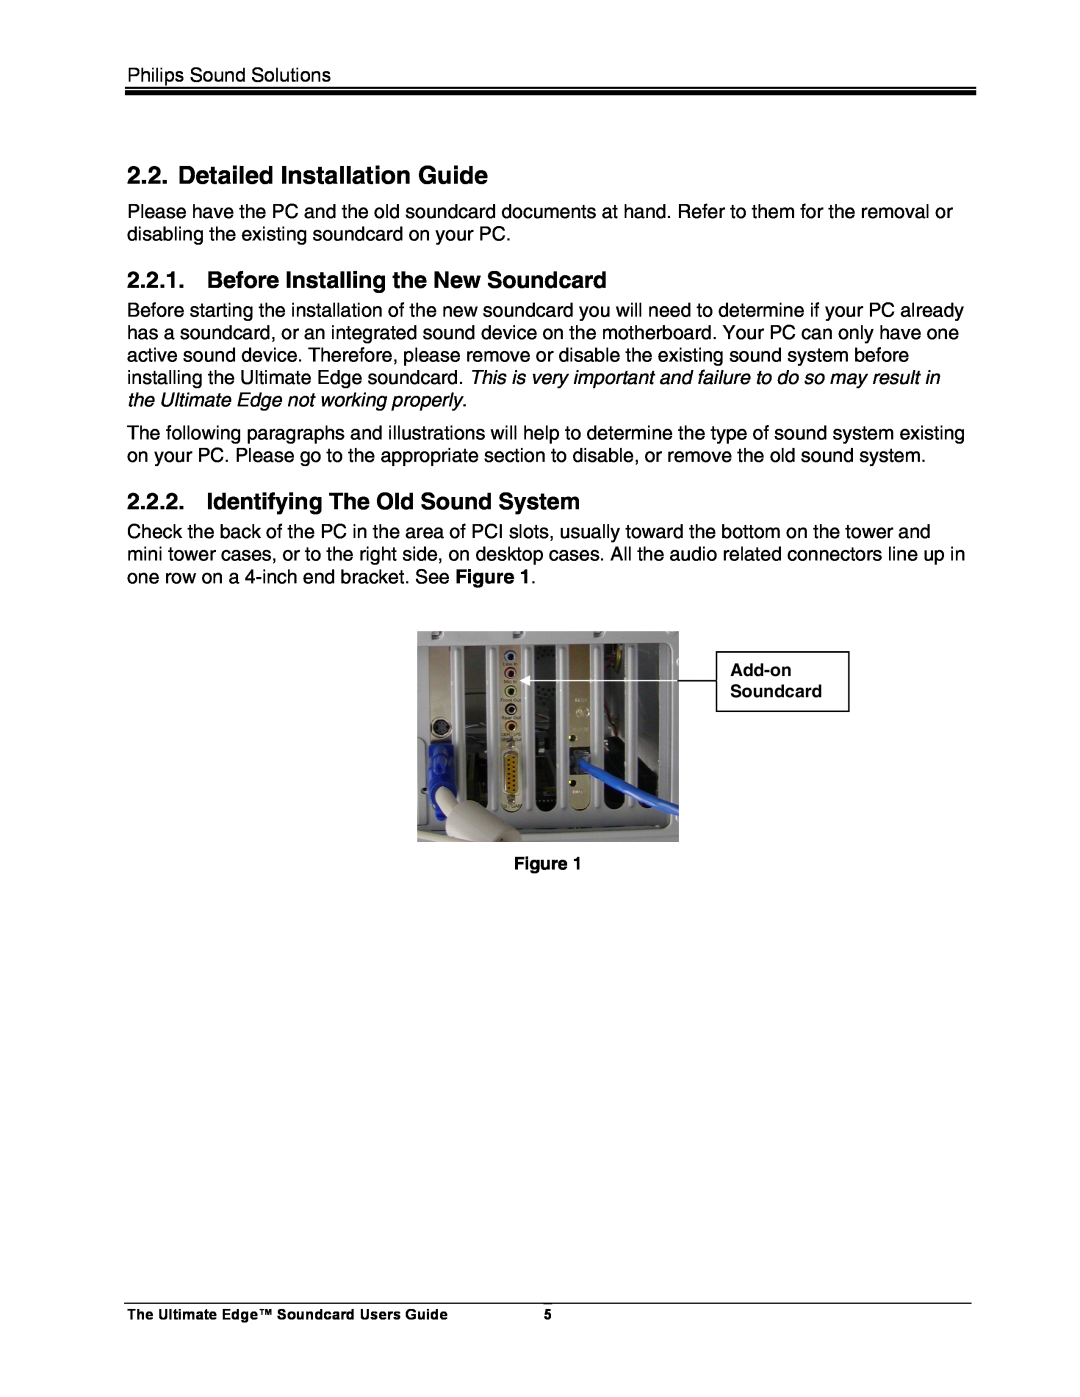 Philips 5.1 manual Detailed Installation Guide, Before Installing the New Soundcard, Identifying The Old Sound System 